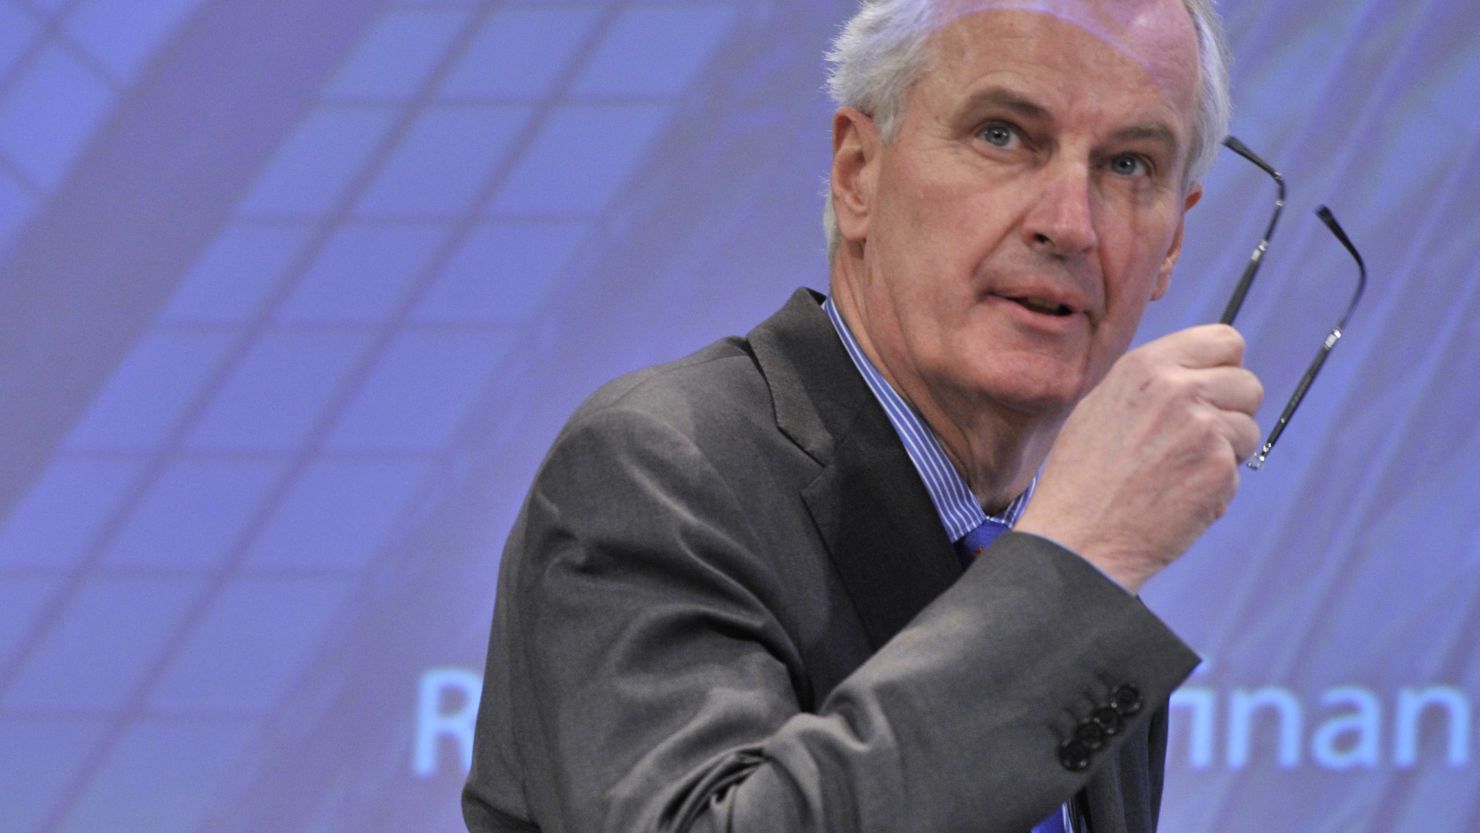 EU commissioner for Internal Market and Services Michel Barnier at the EU Headquarters in Brussels,  March 19, 2012.